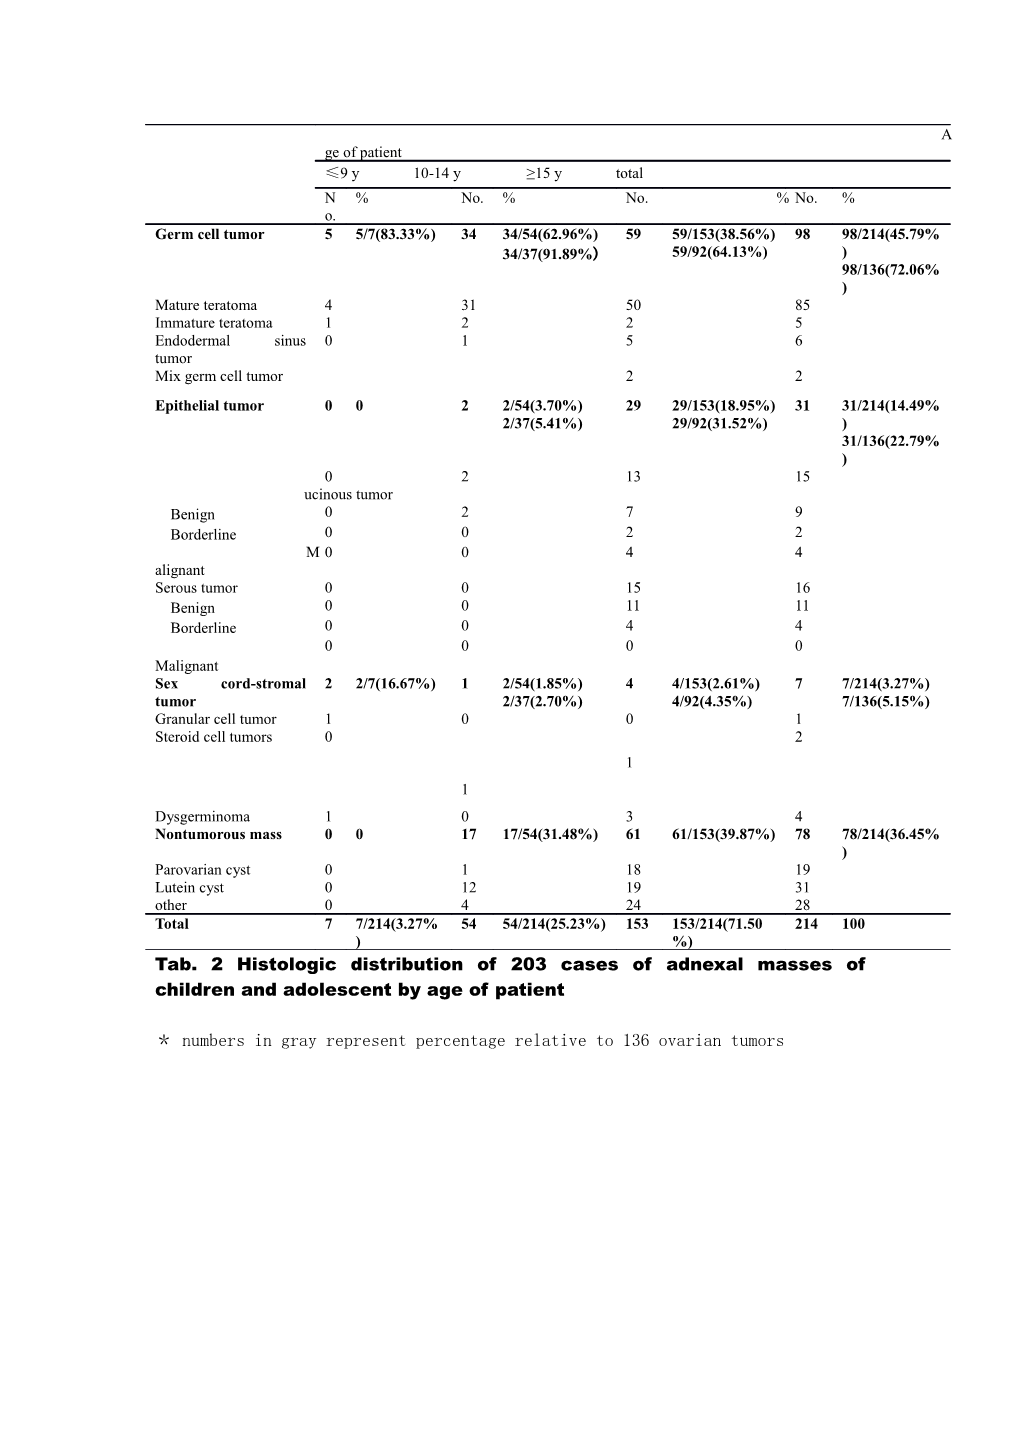 Tab. 2 Histologic Distribution of 203 Cases of Adnexal Masses of Children and Adolescent